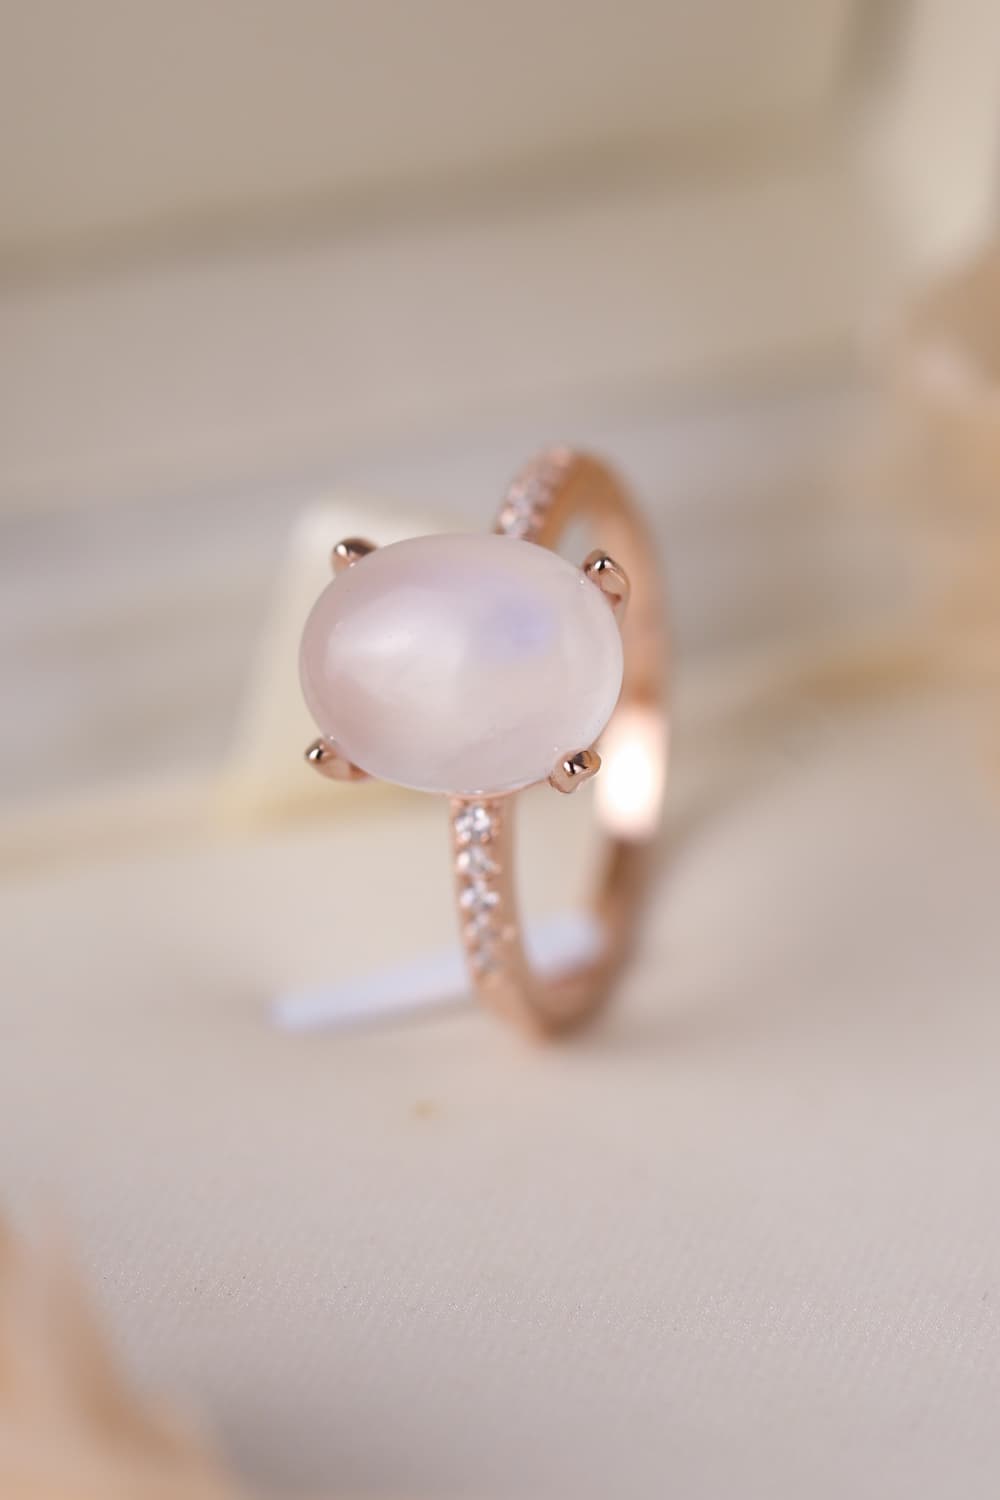 Moonstone Sterling Ring with Gem Accents - ZISK Shop  